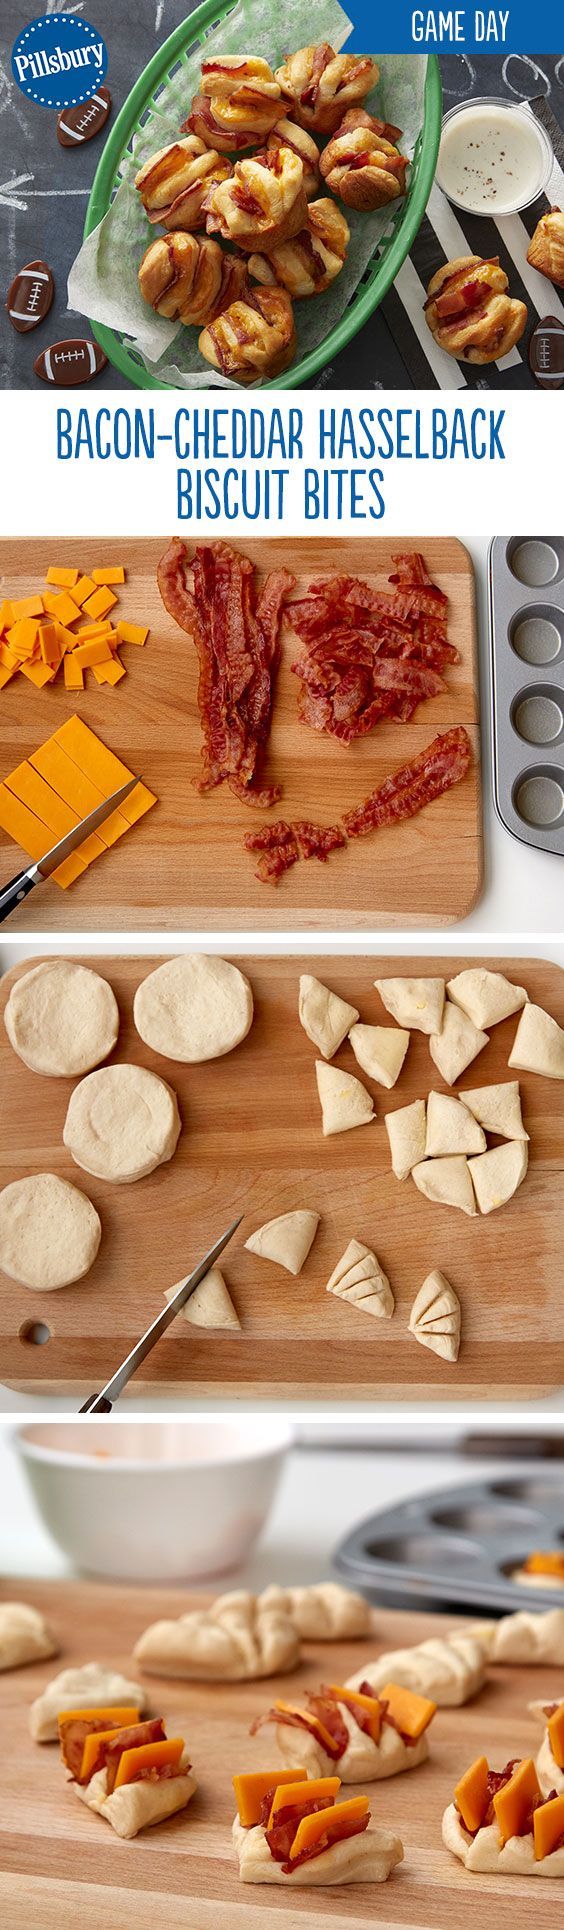 These delicious biscuit bites are jam-packed with bacon and cheese and brushed with melted butter. Make sure these have a spot